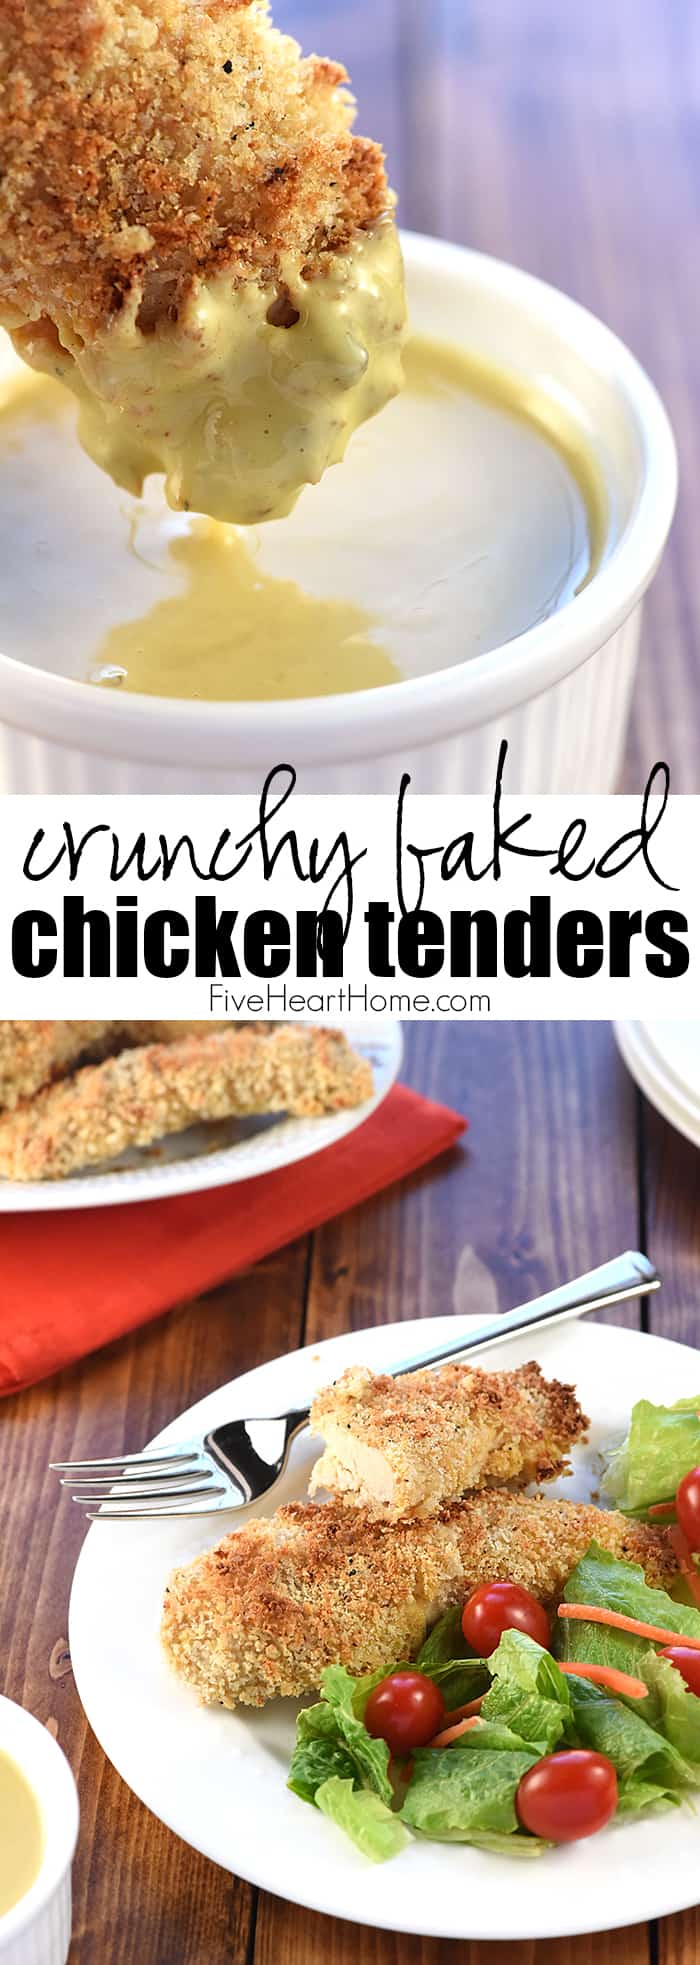 Crunchy Baked Chicken Tenders ~ juicy on the inside and crispy on the outside, the entire family will love this simple, delicious, chicken dinner! | FiveHeartHome.com via @fivehearthome